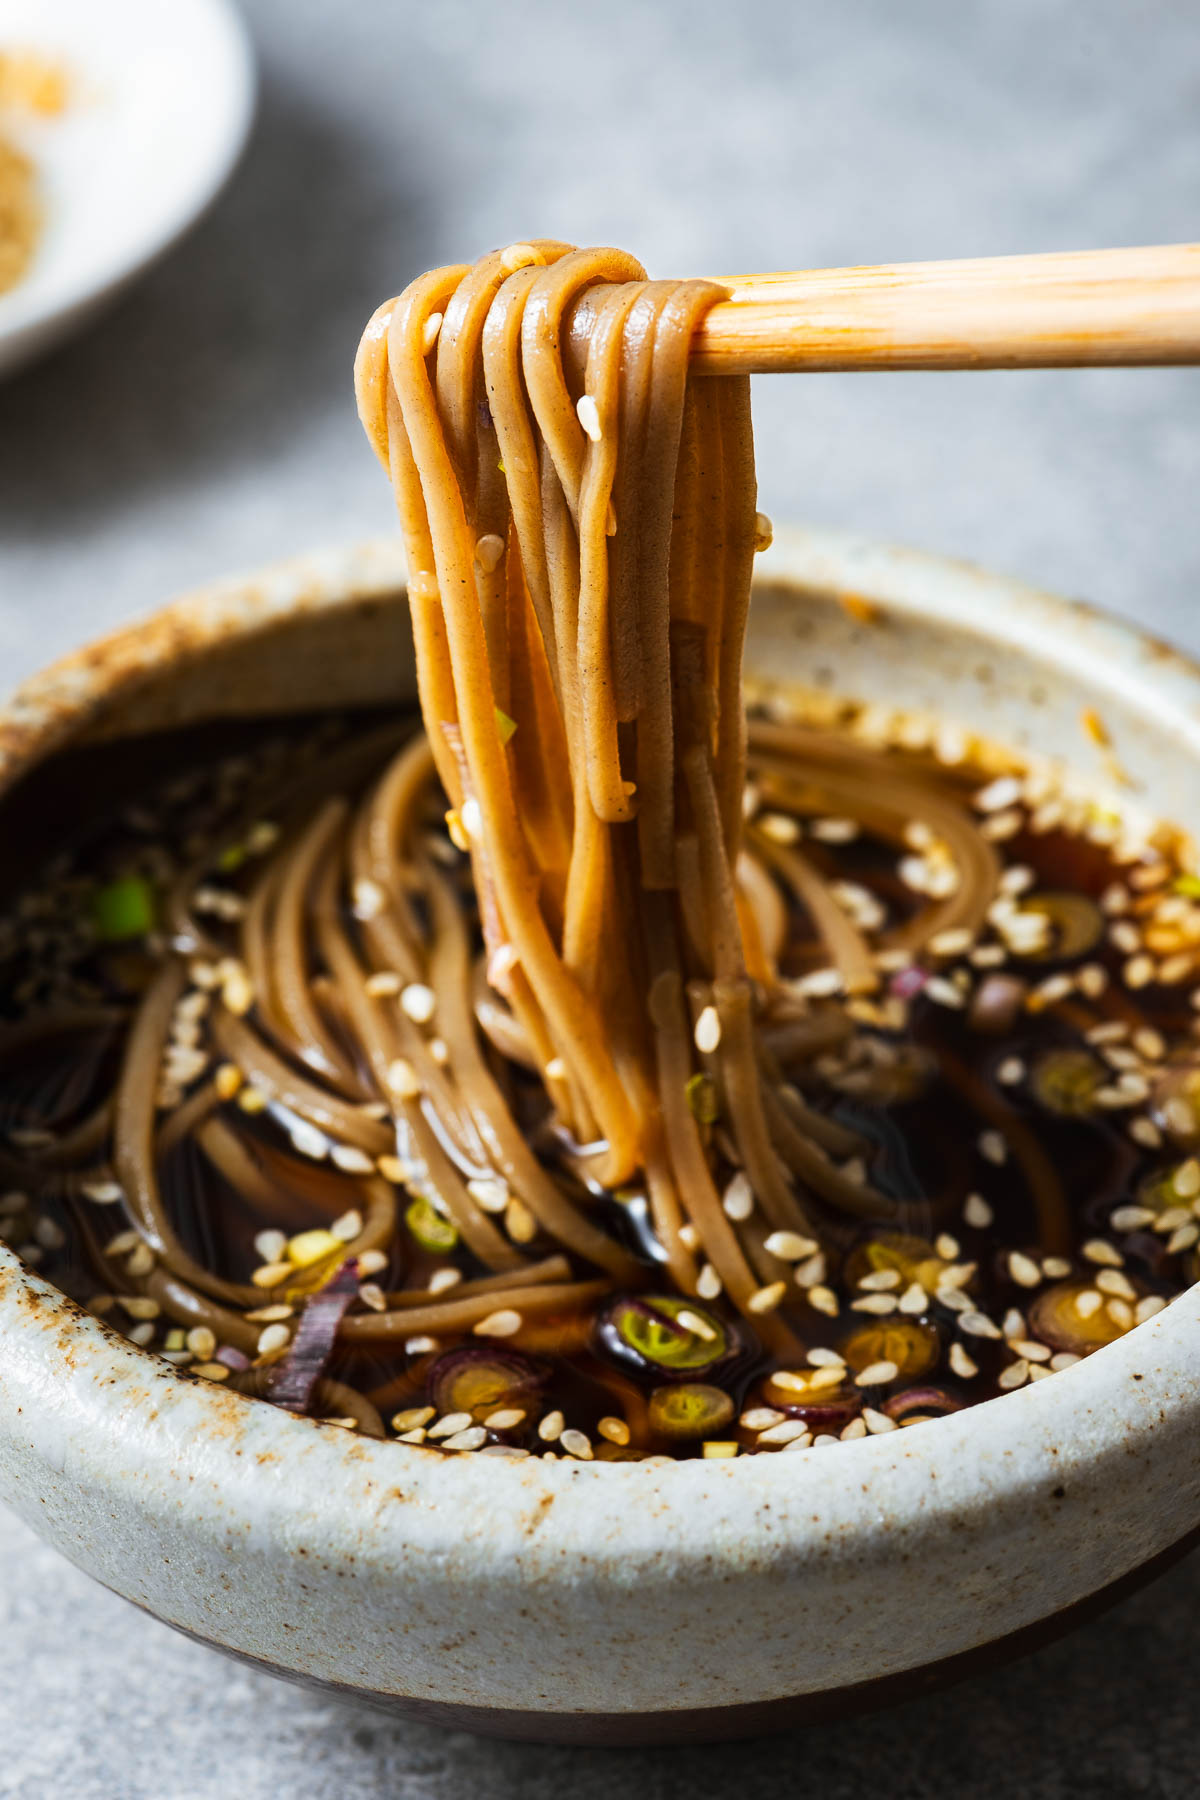 Cold soba noodles dipped into a mentsuyu noodle dipping sauce.